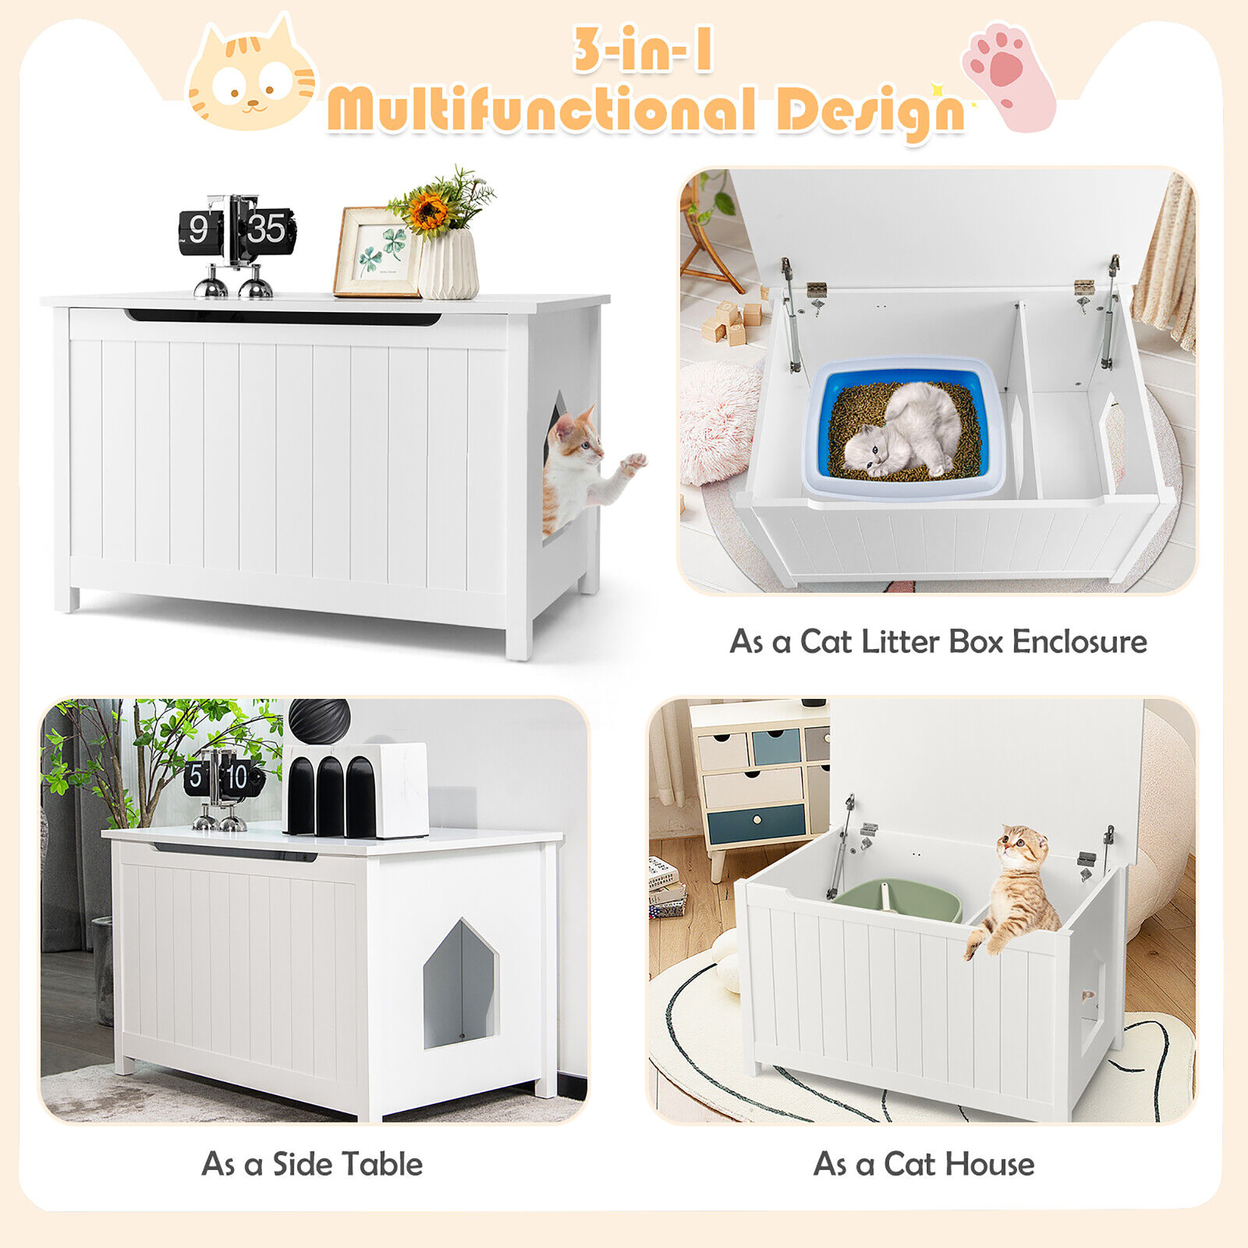 Wooden Enclosure Cat Litter Box W/ Top Opening Side Table Furniture - White